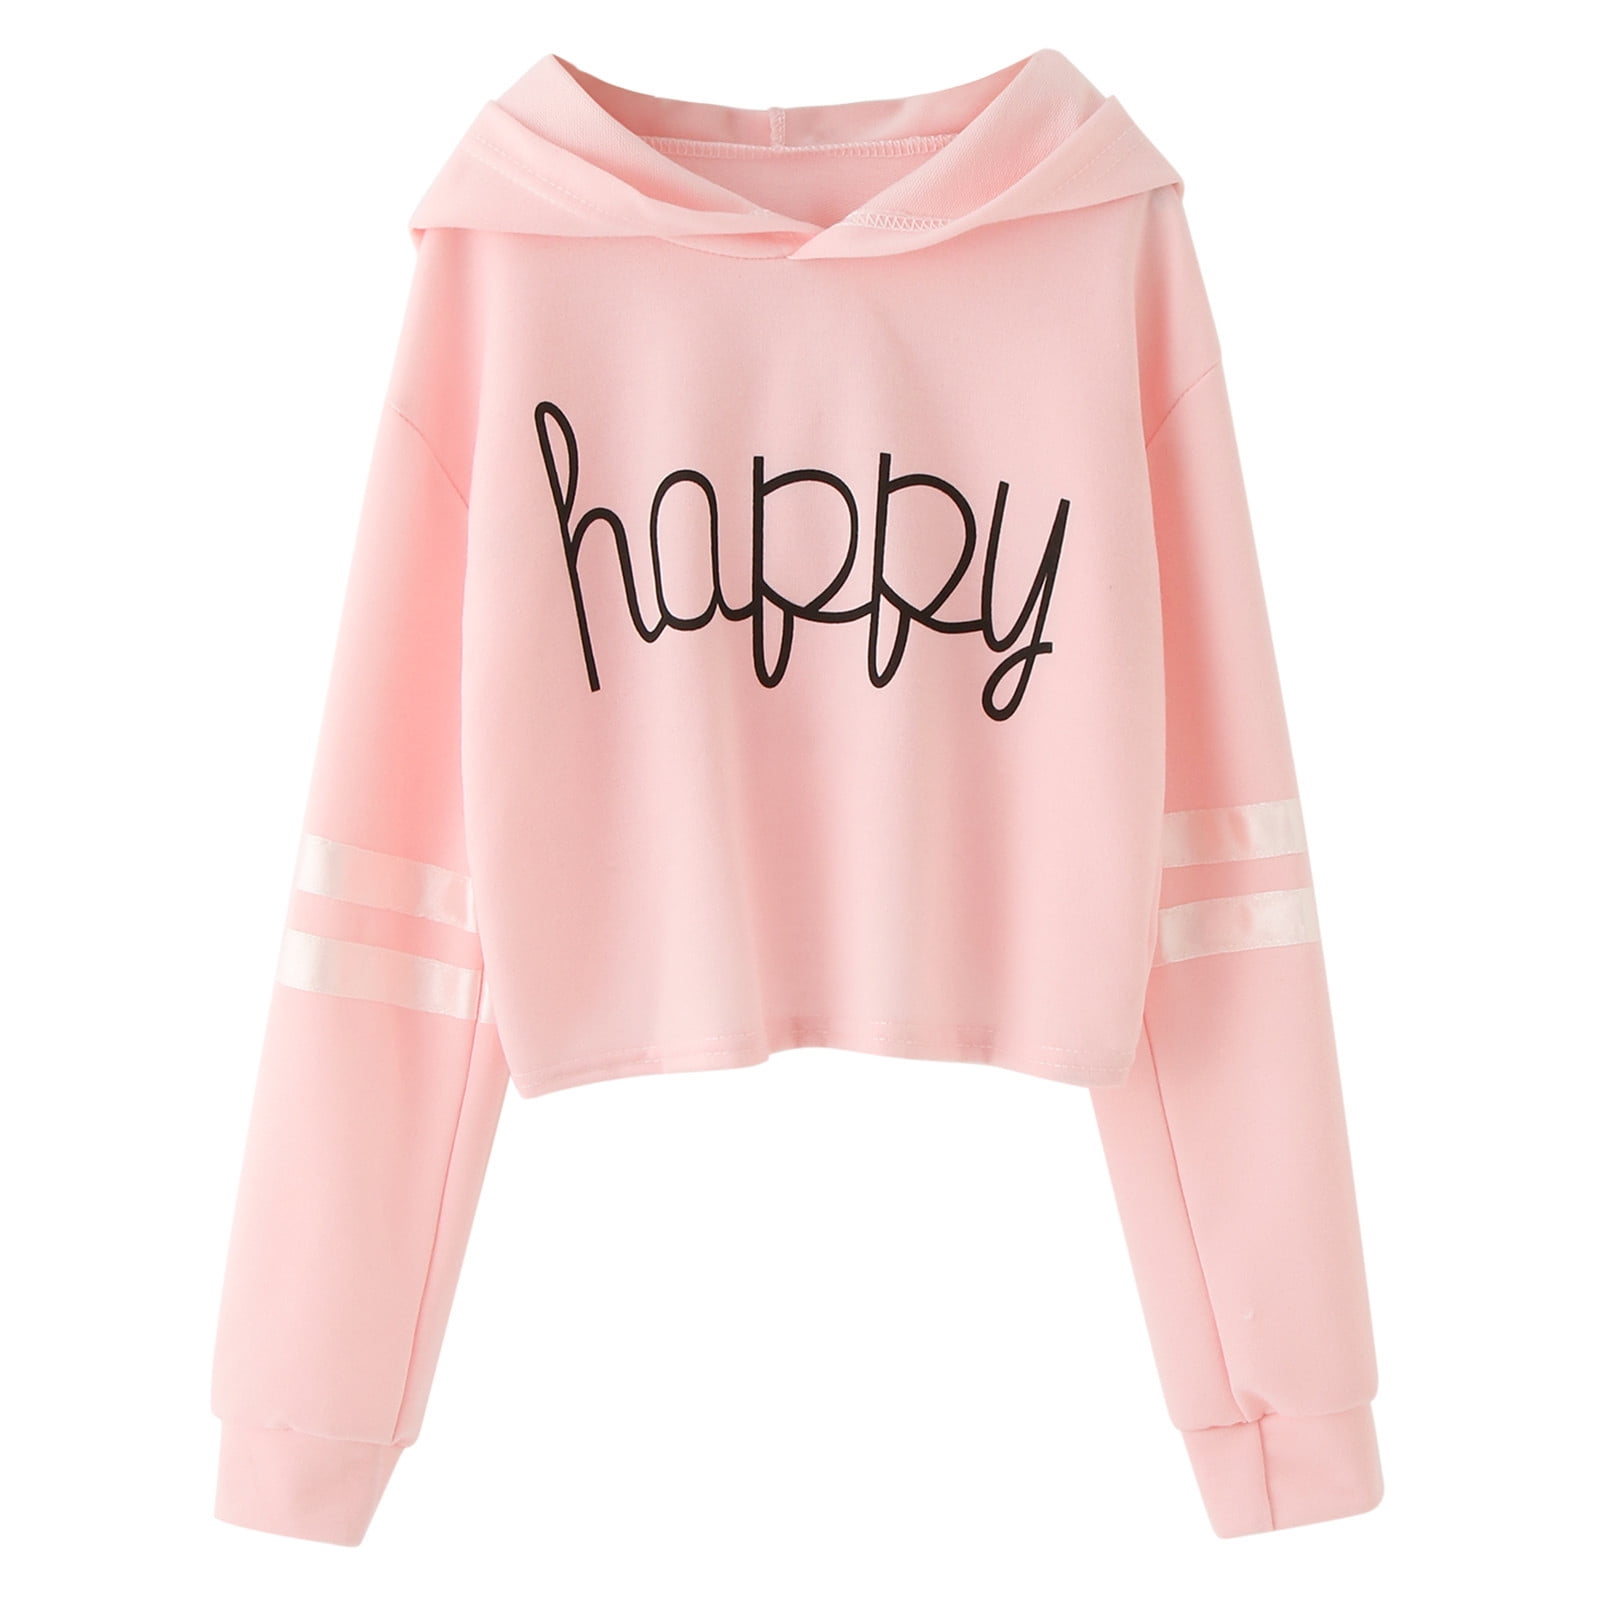  Hotkey Girls Fashion Sweatshirt, Pullover Hoodie for Grils,  Youth Hoodie Crewneck Printed Cute Soft Loose Casual Tops: Clothing, Shoes  & Jewelry